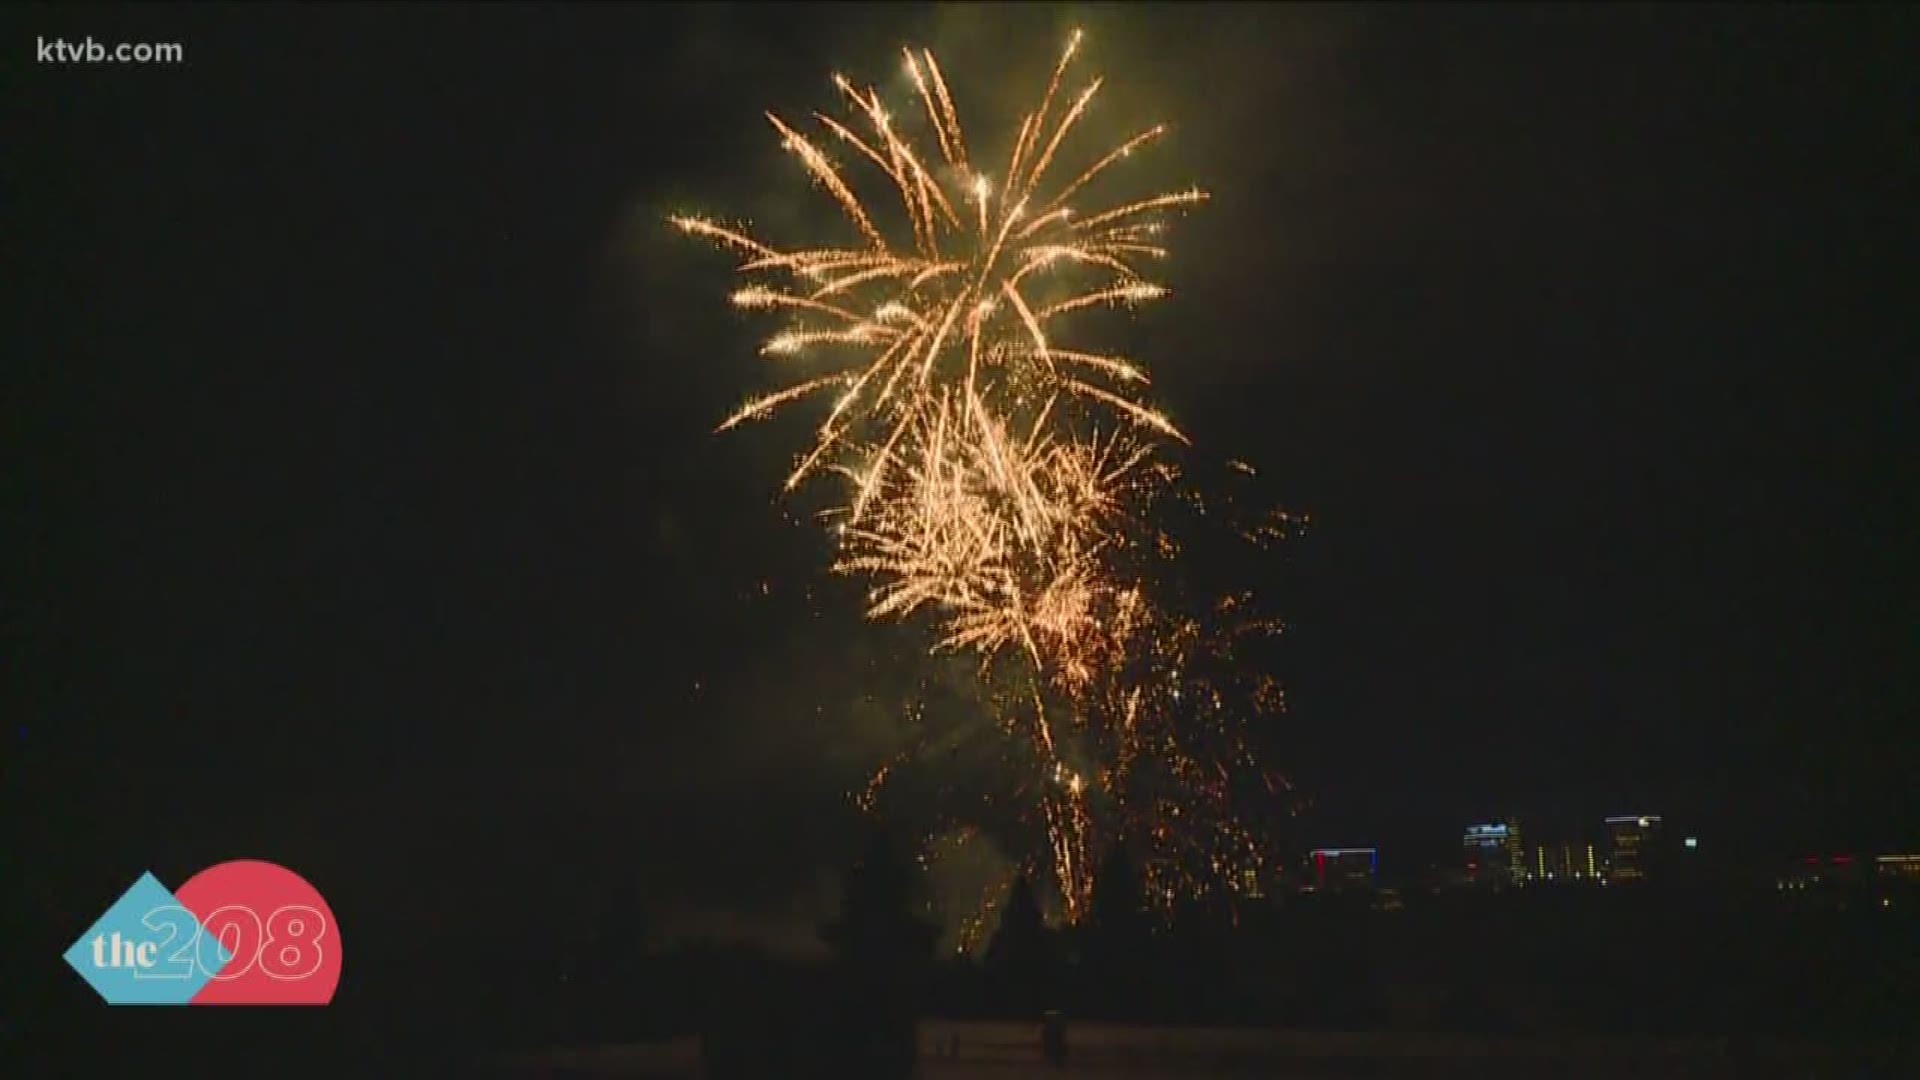 Numerous parades and fireworks celebrations have been canceled this year.